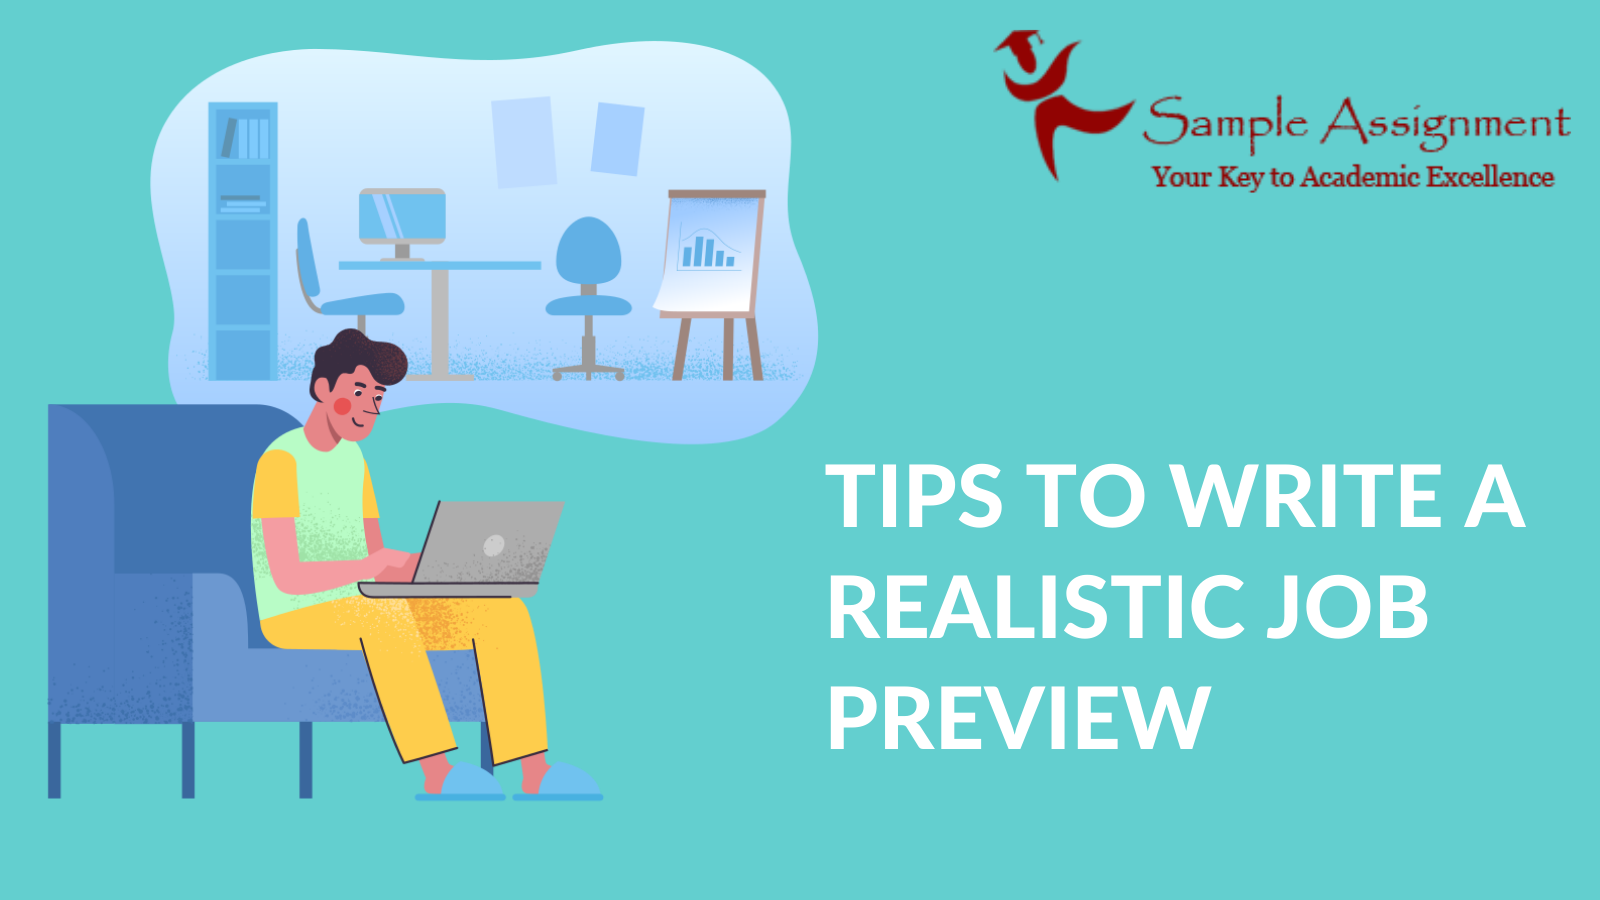 Tips to write a Realistic Job Preview